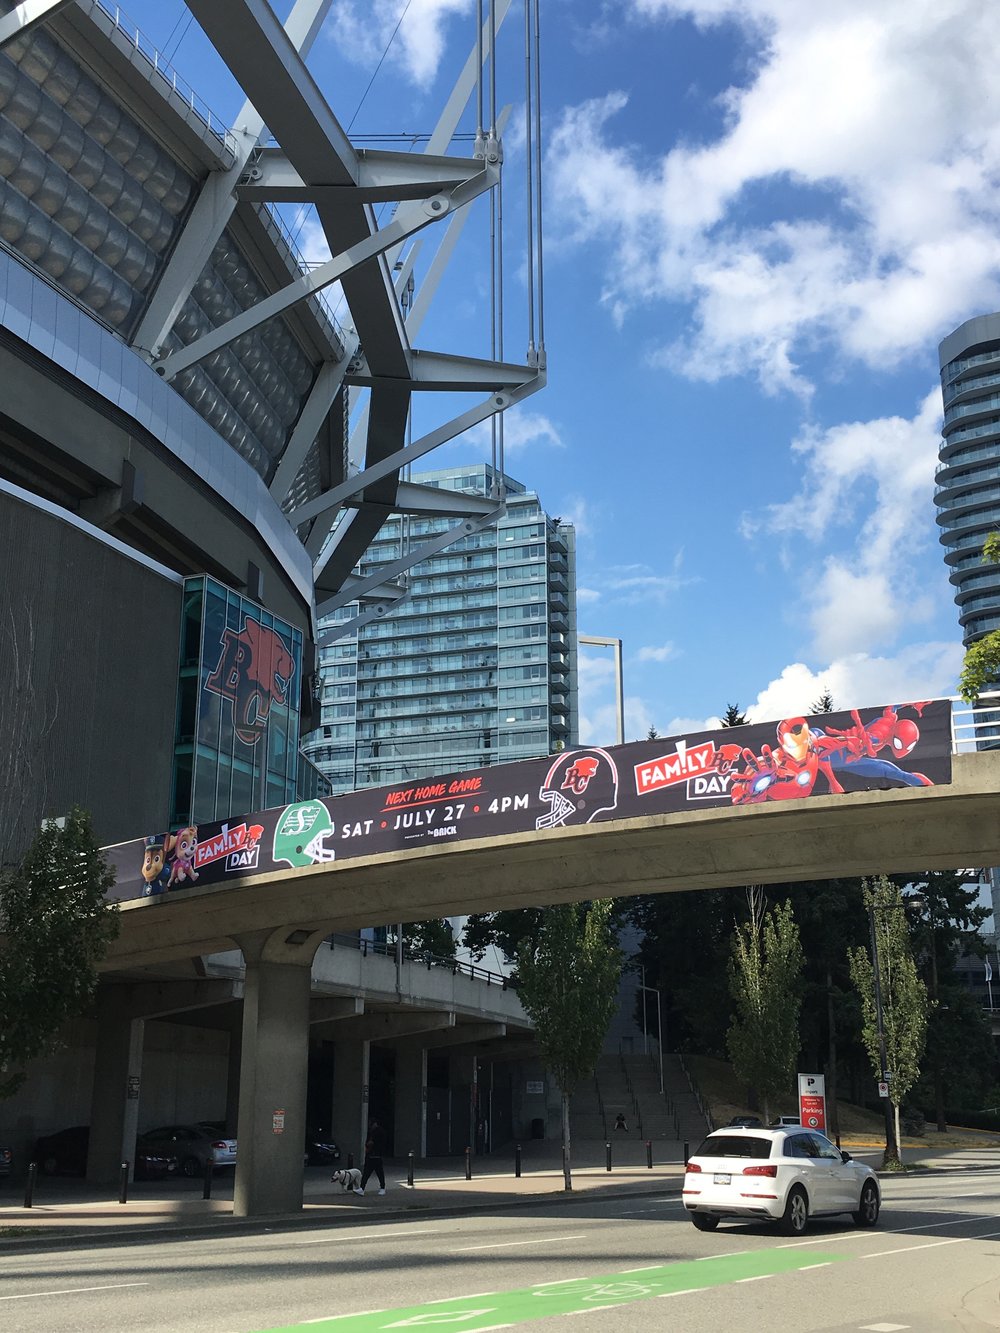 BC Lions sky walk banner for Family Day at the game